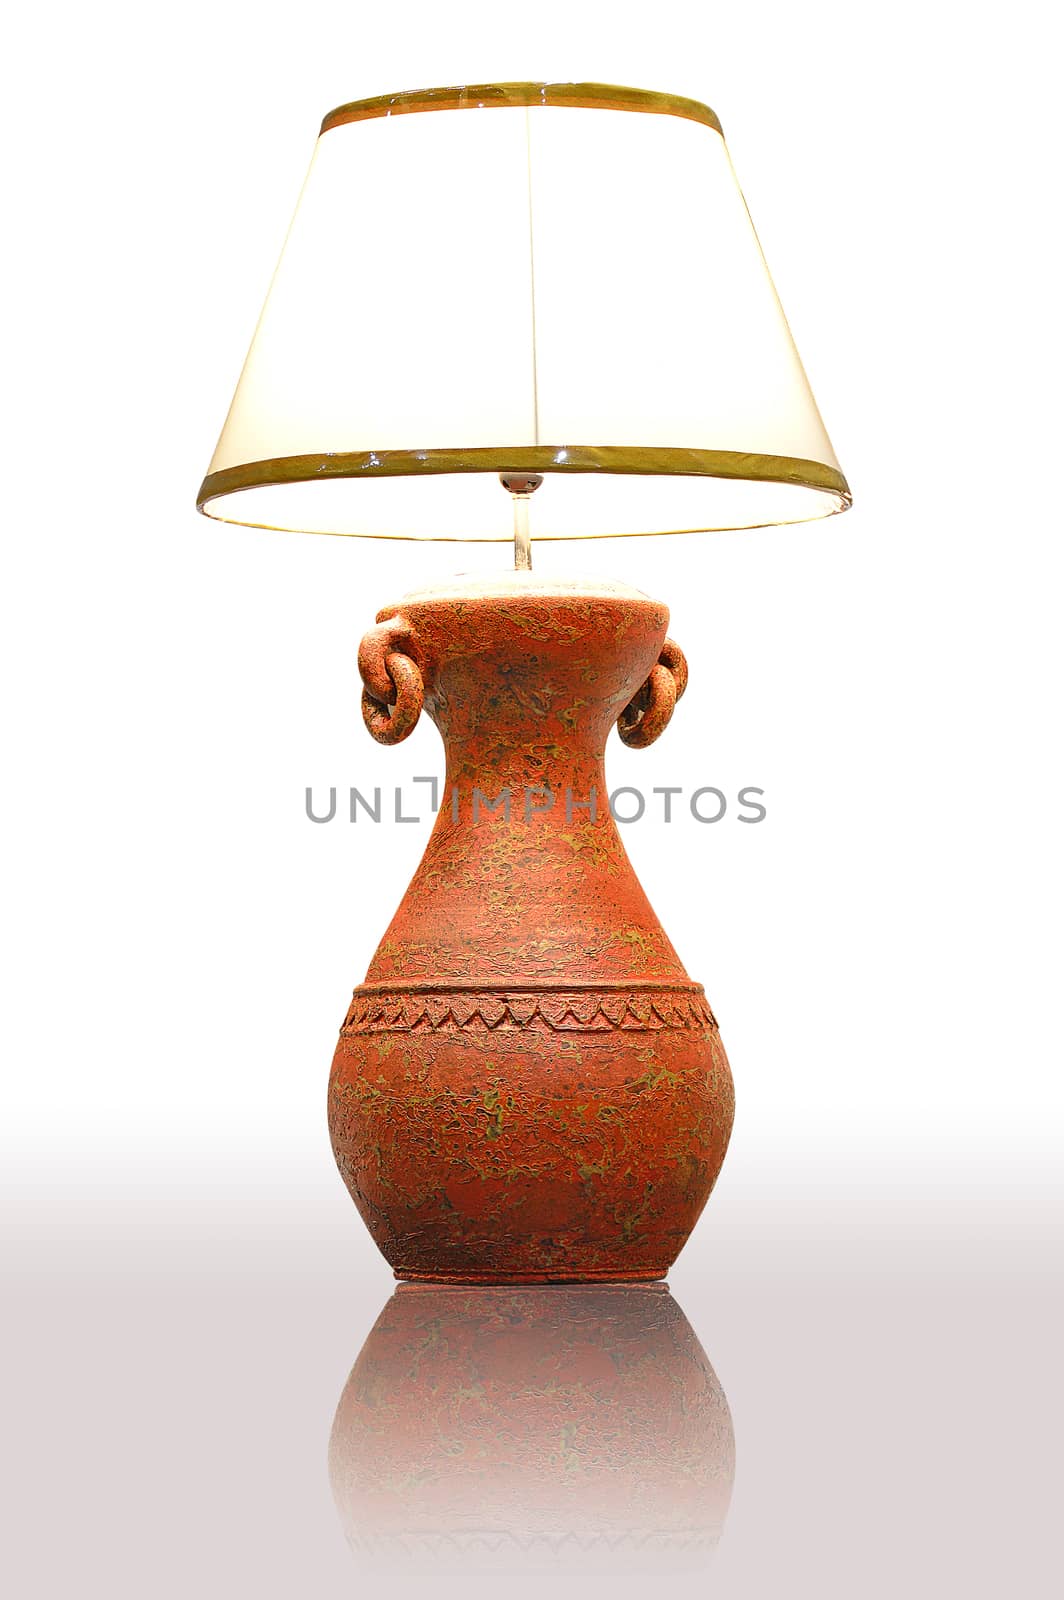 Vintage table lamp with ground reflex